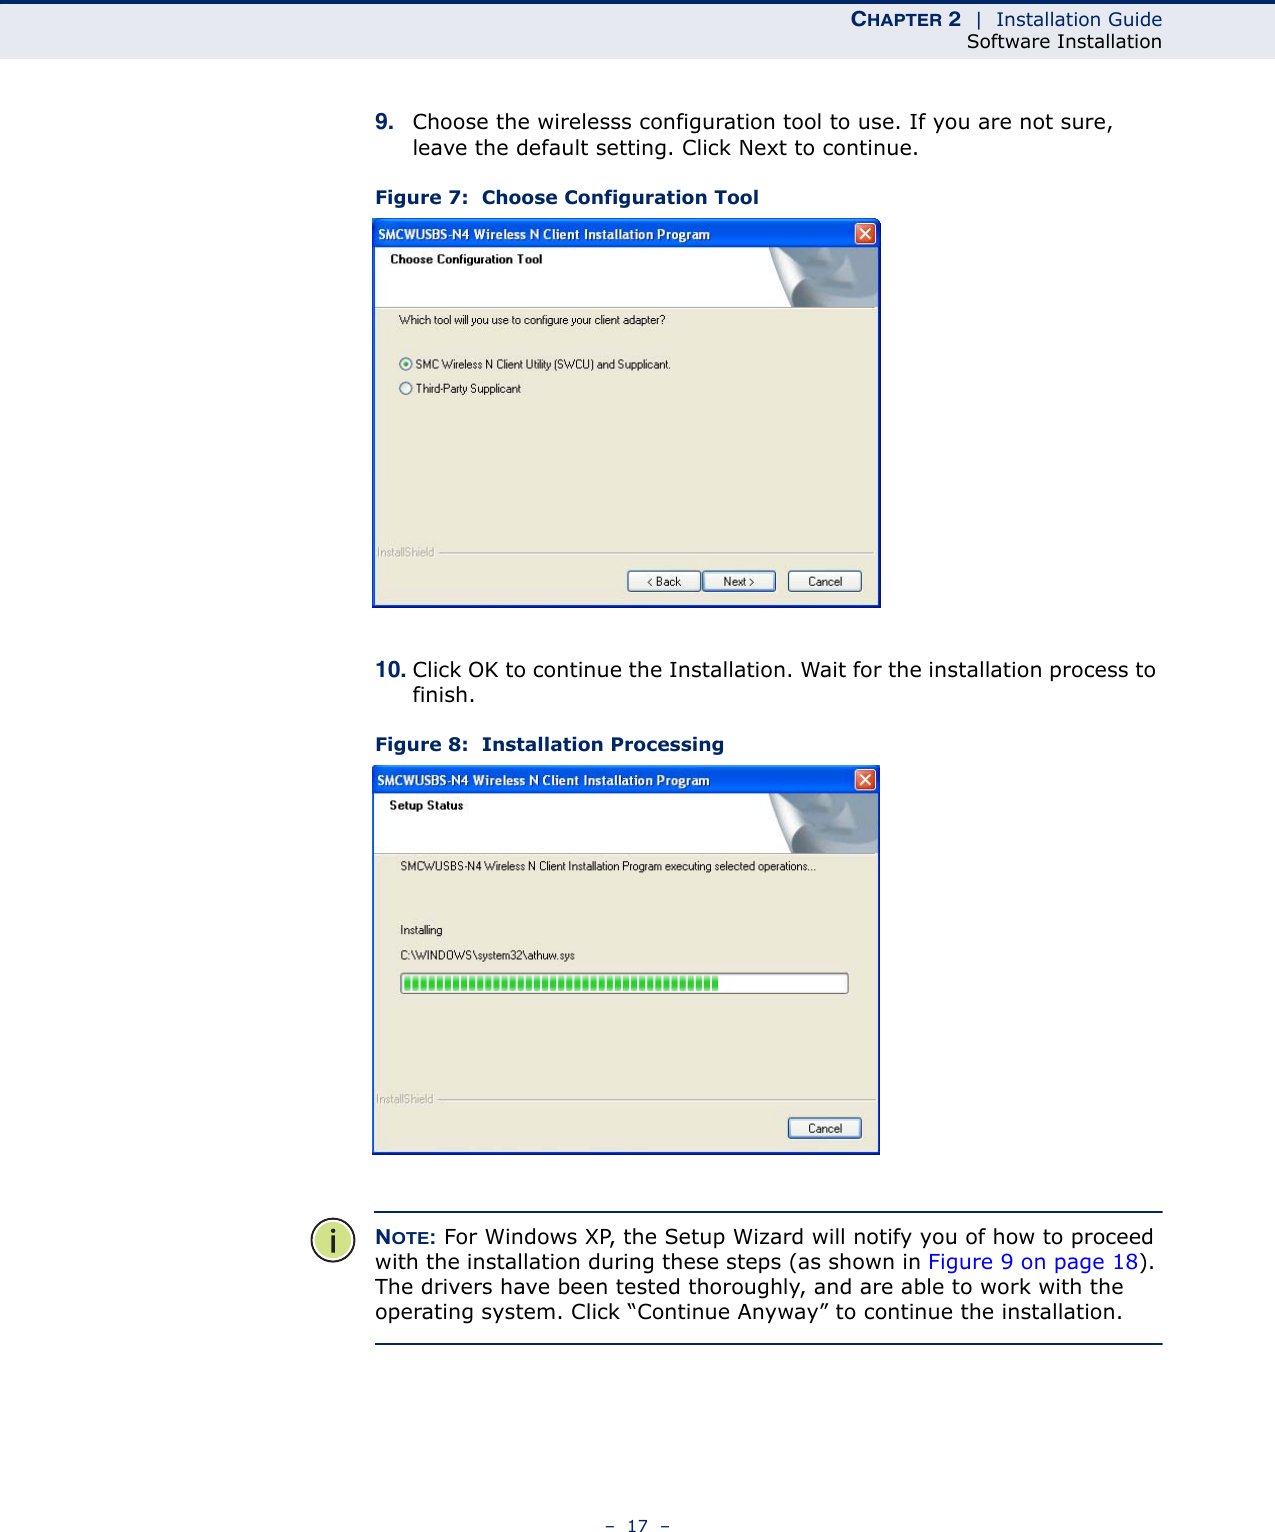 CHAPTER 2  |  Installation GuideSoftware Installation–  17  –9. Choose the wirelesss configuration tool to use. If you are not sure, leave the default setting. Click Next to continue.Figure 7:  Choose Configuration Tool10. Click OK to continue the Installation. Wait for the installation process to finish.Figure 8:  Installation ProcessingNOTE: For Windows XP, the Setup Wizard will notify you of how to proceed with the installation during these steps (as shown in Figure 9 on page 18). The drivers have been tested thoroughly, and are able to work with the operating system. Click “Continue Anyway” to continue the installation.